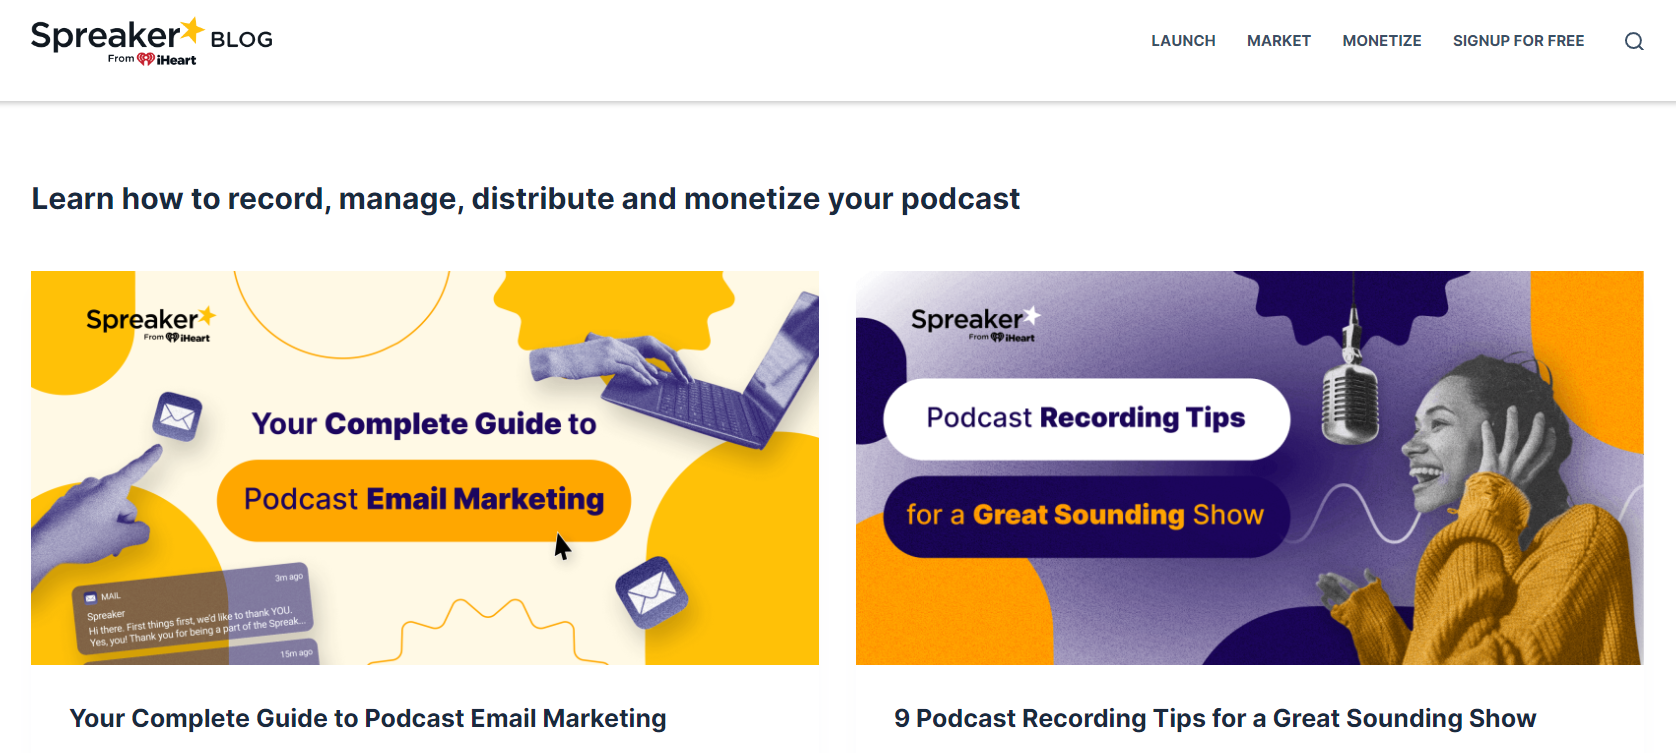 13 Podcast Blogs You Shouldn’t Miss